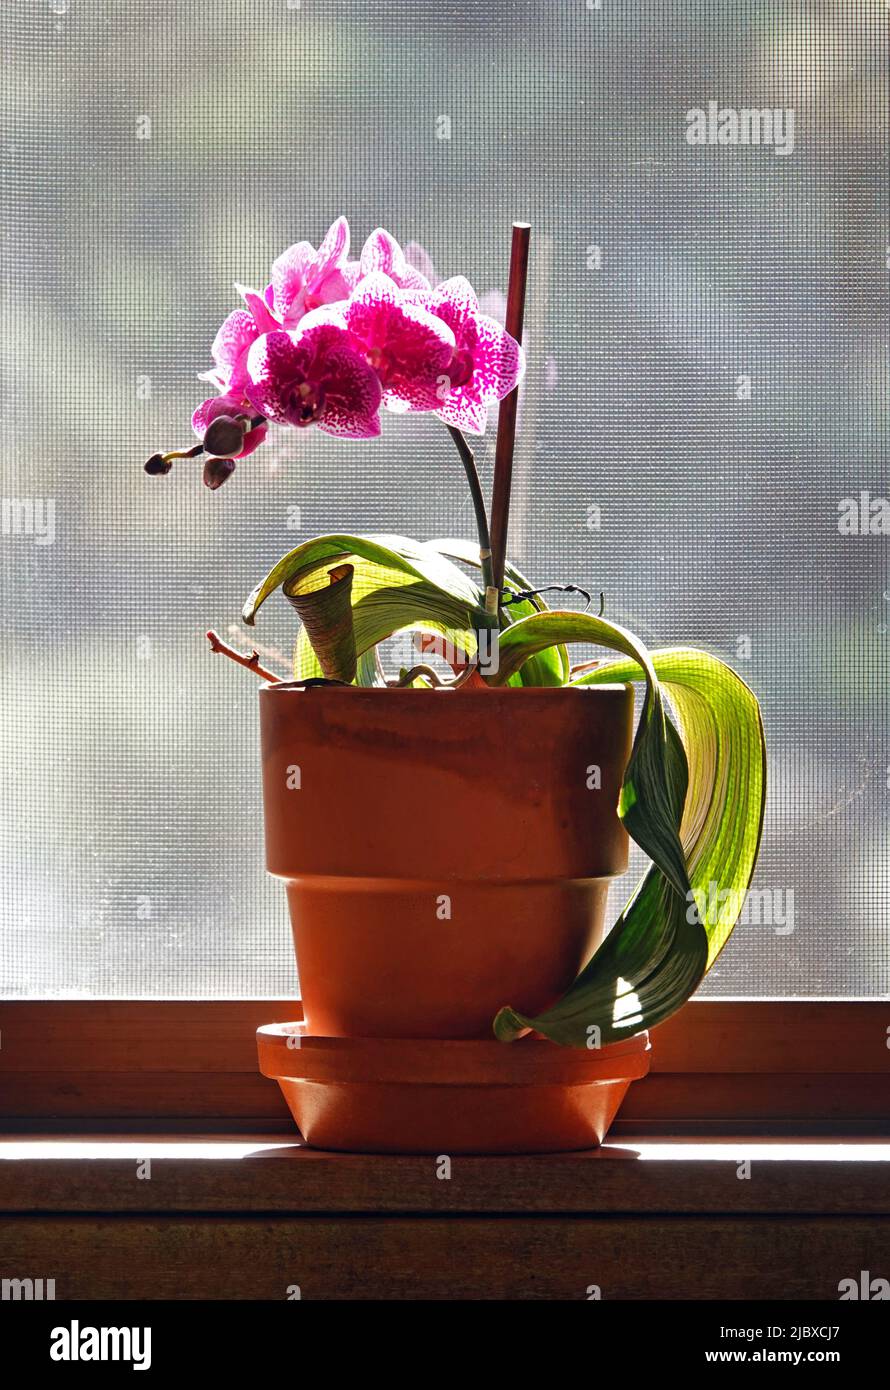 A pink orchid growing in a clay pot, sitting on a window sill. Stock Photo